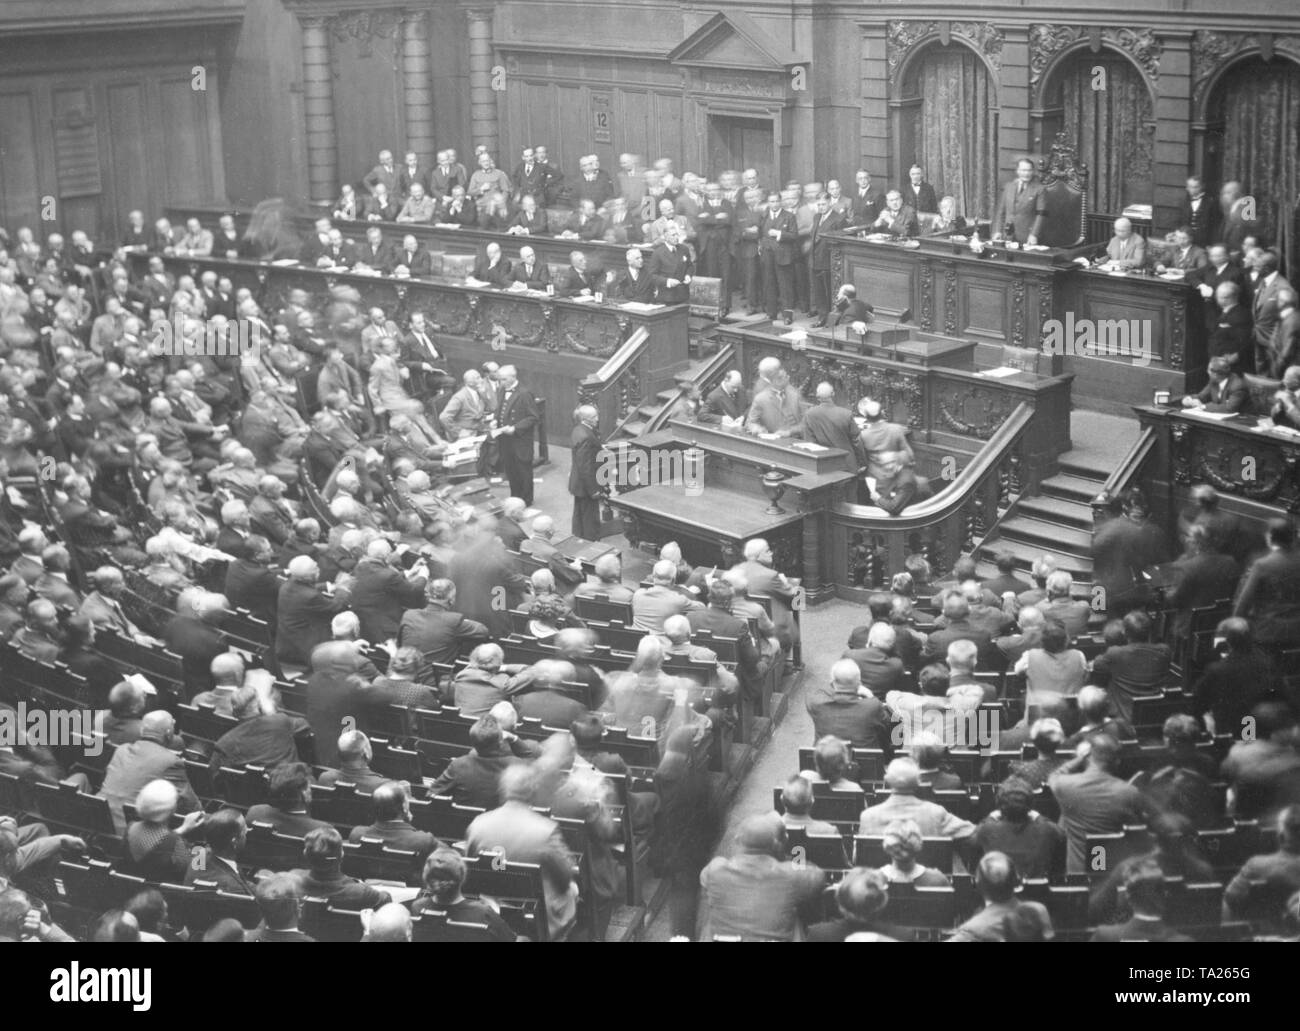 Chancellor Franz von Papen (on the government bench standing) wants to speak while Hermann Goering is (top right) stands in front of the chair of the President of the Reichstag. On the government bench sitting next to Papen, from right to left: Minister of Foreign Affairs Konstantin Freiherr von Neurath, Minister of the Interior Wilhelm Freiherr von Gayl, Economy Minister Hermann Warmbold as well as Reich Defence Minister Kurt von Schleicher. Stock Photo